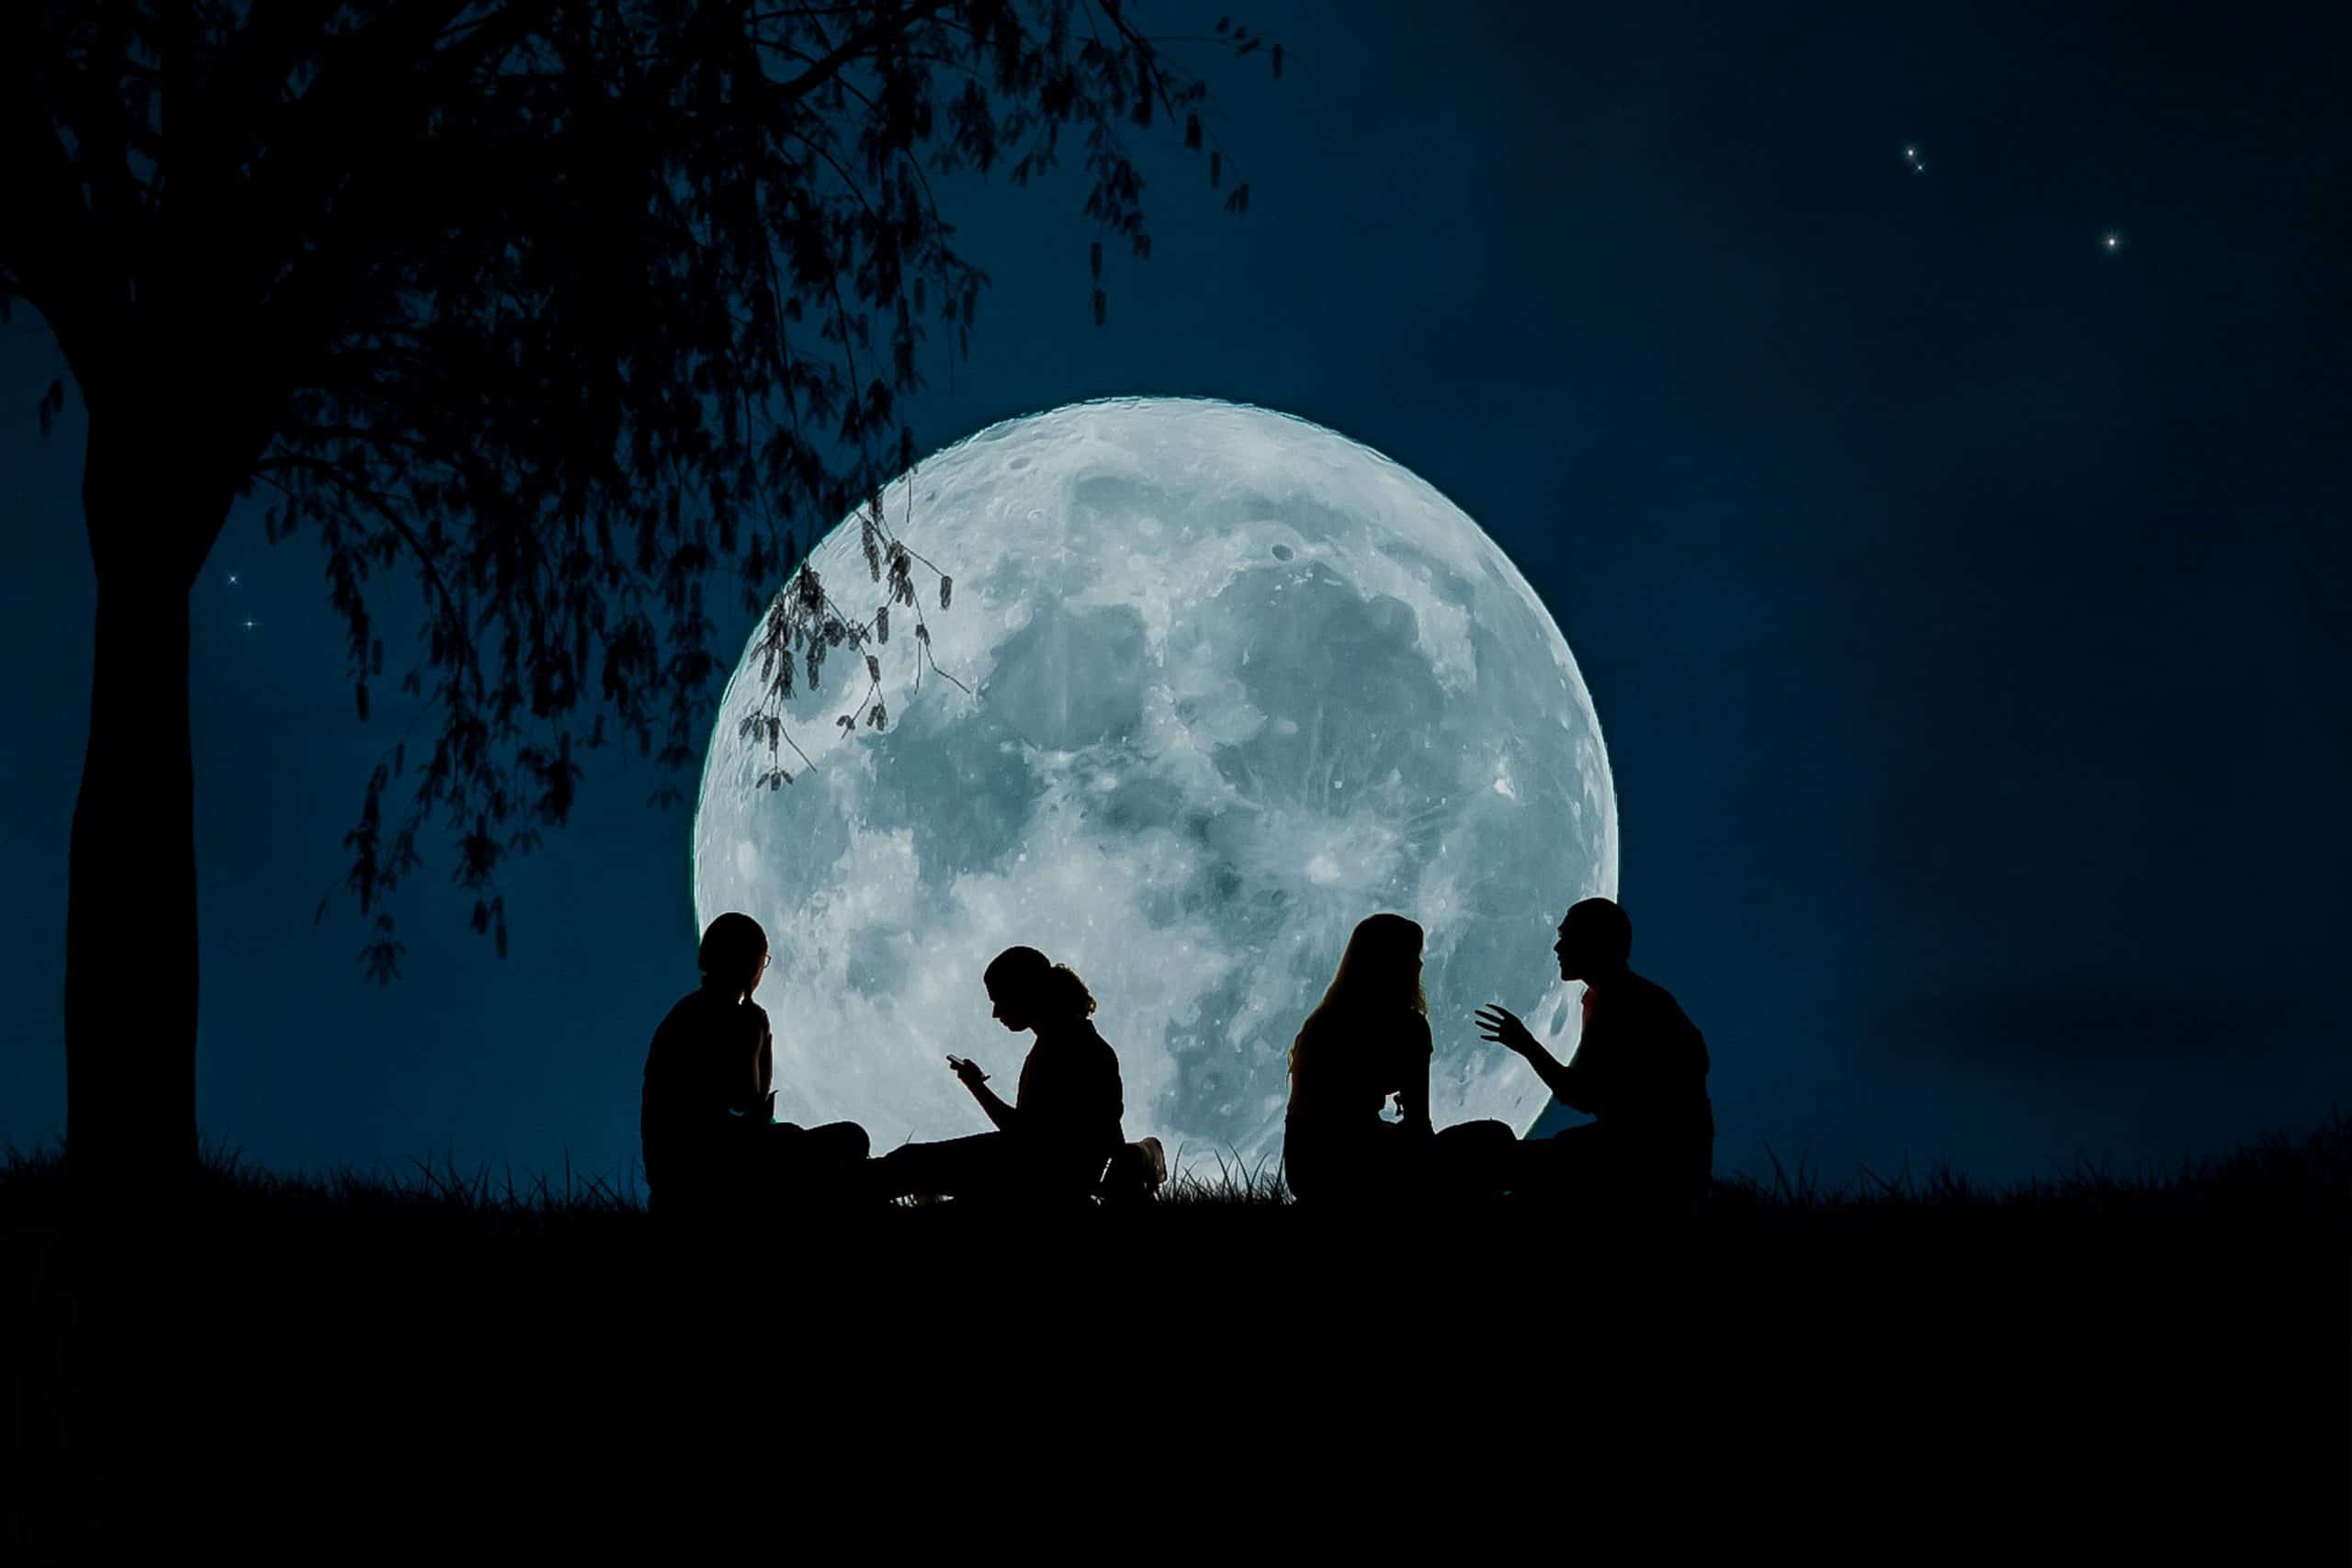 Silhouettes of people in moonlight.